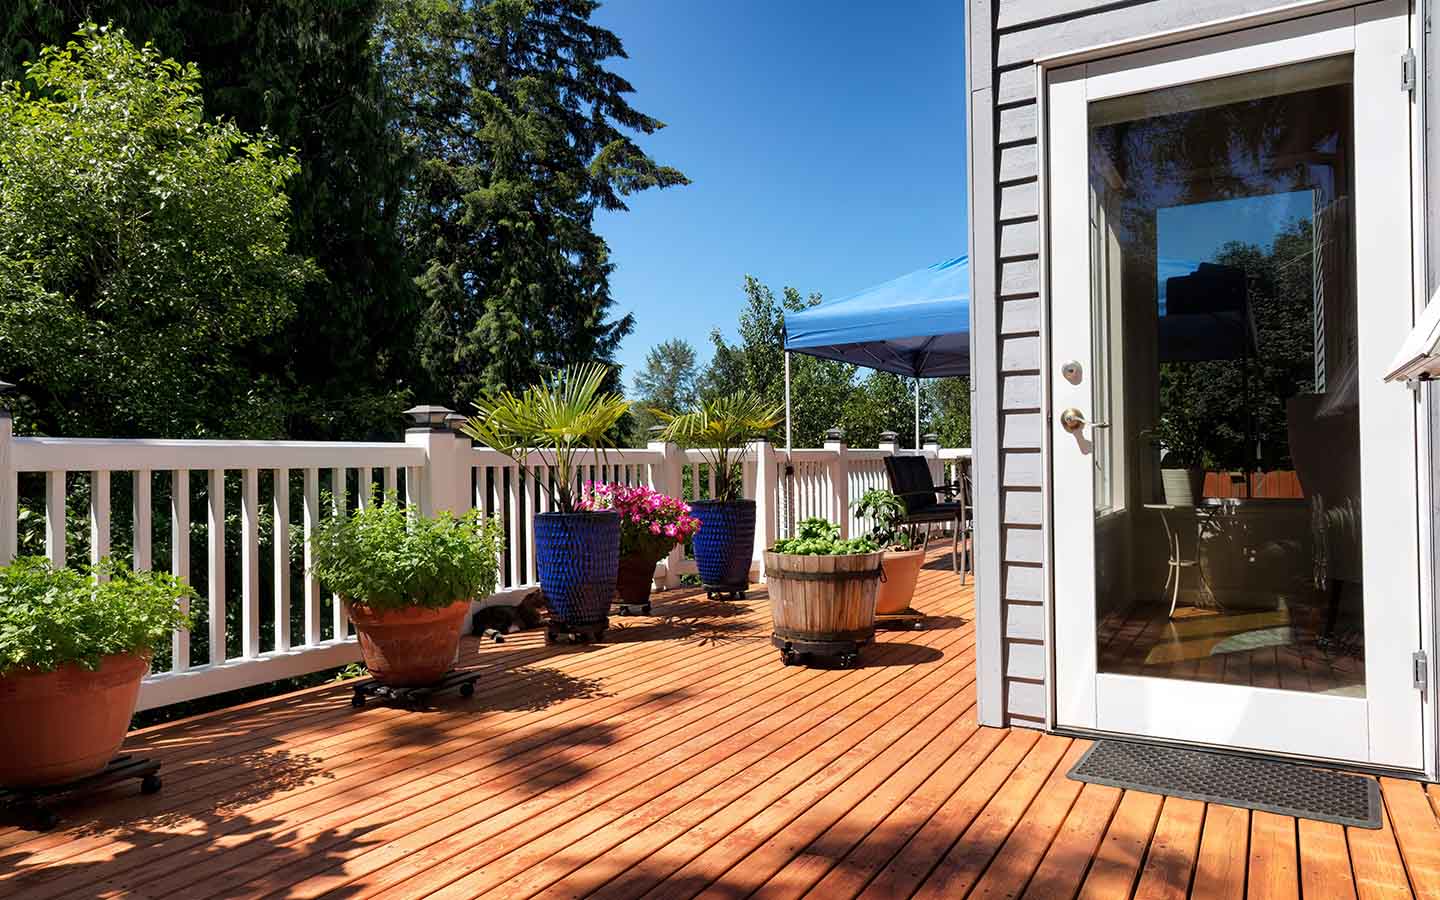 let’s go through the difference between difference between deck vs patio